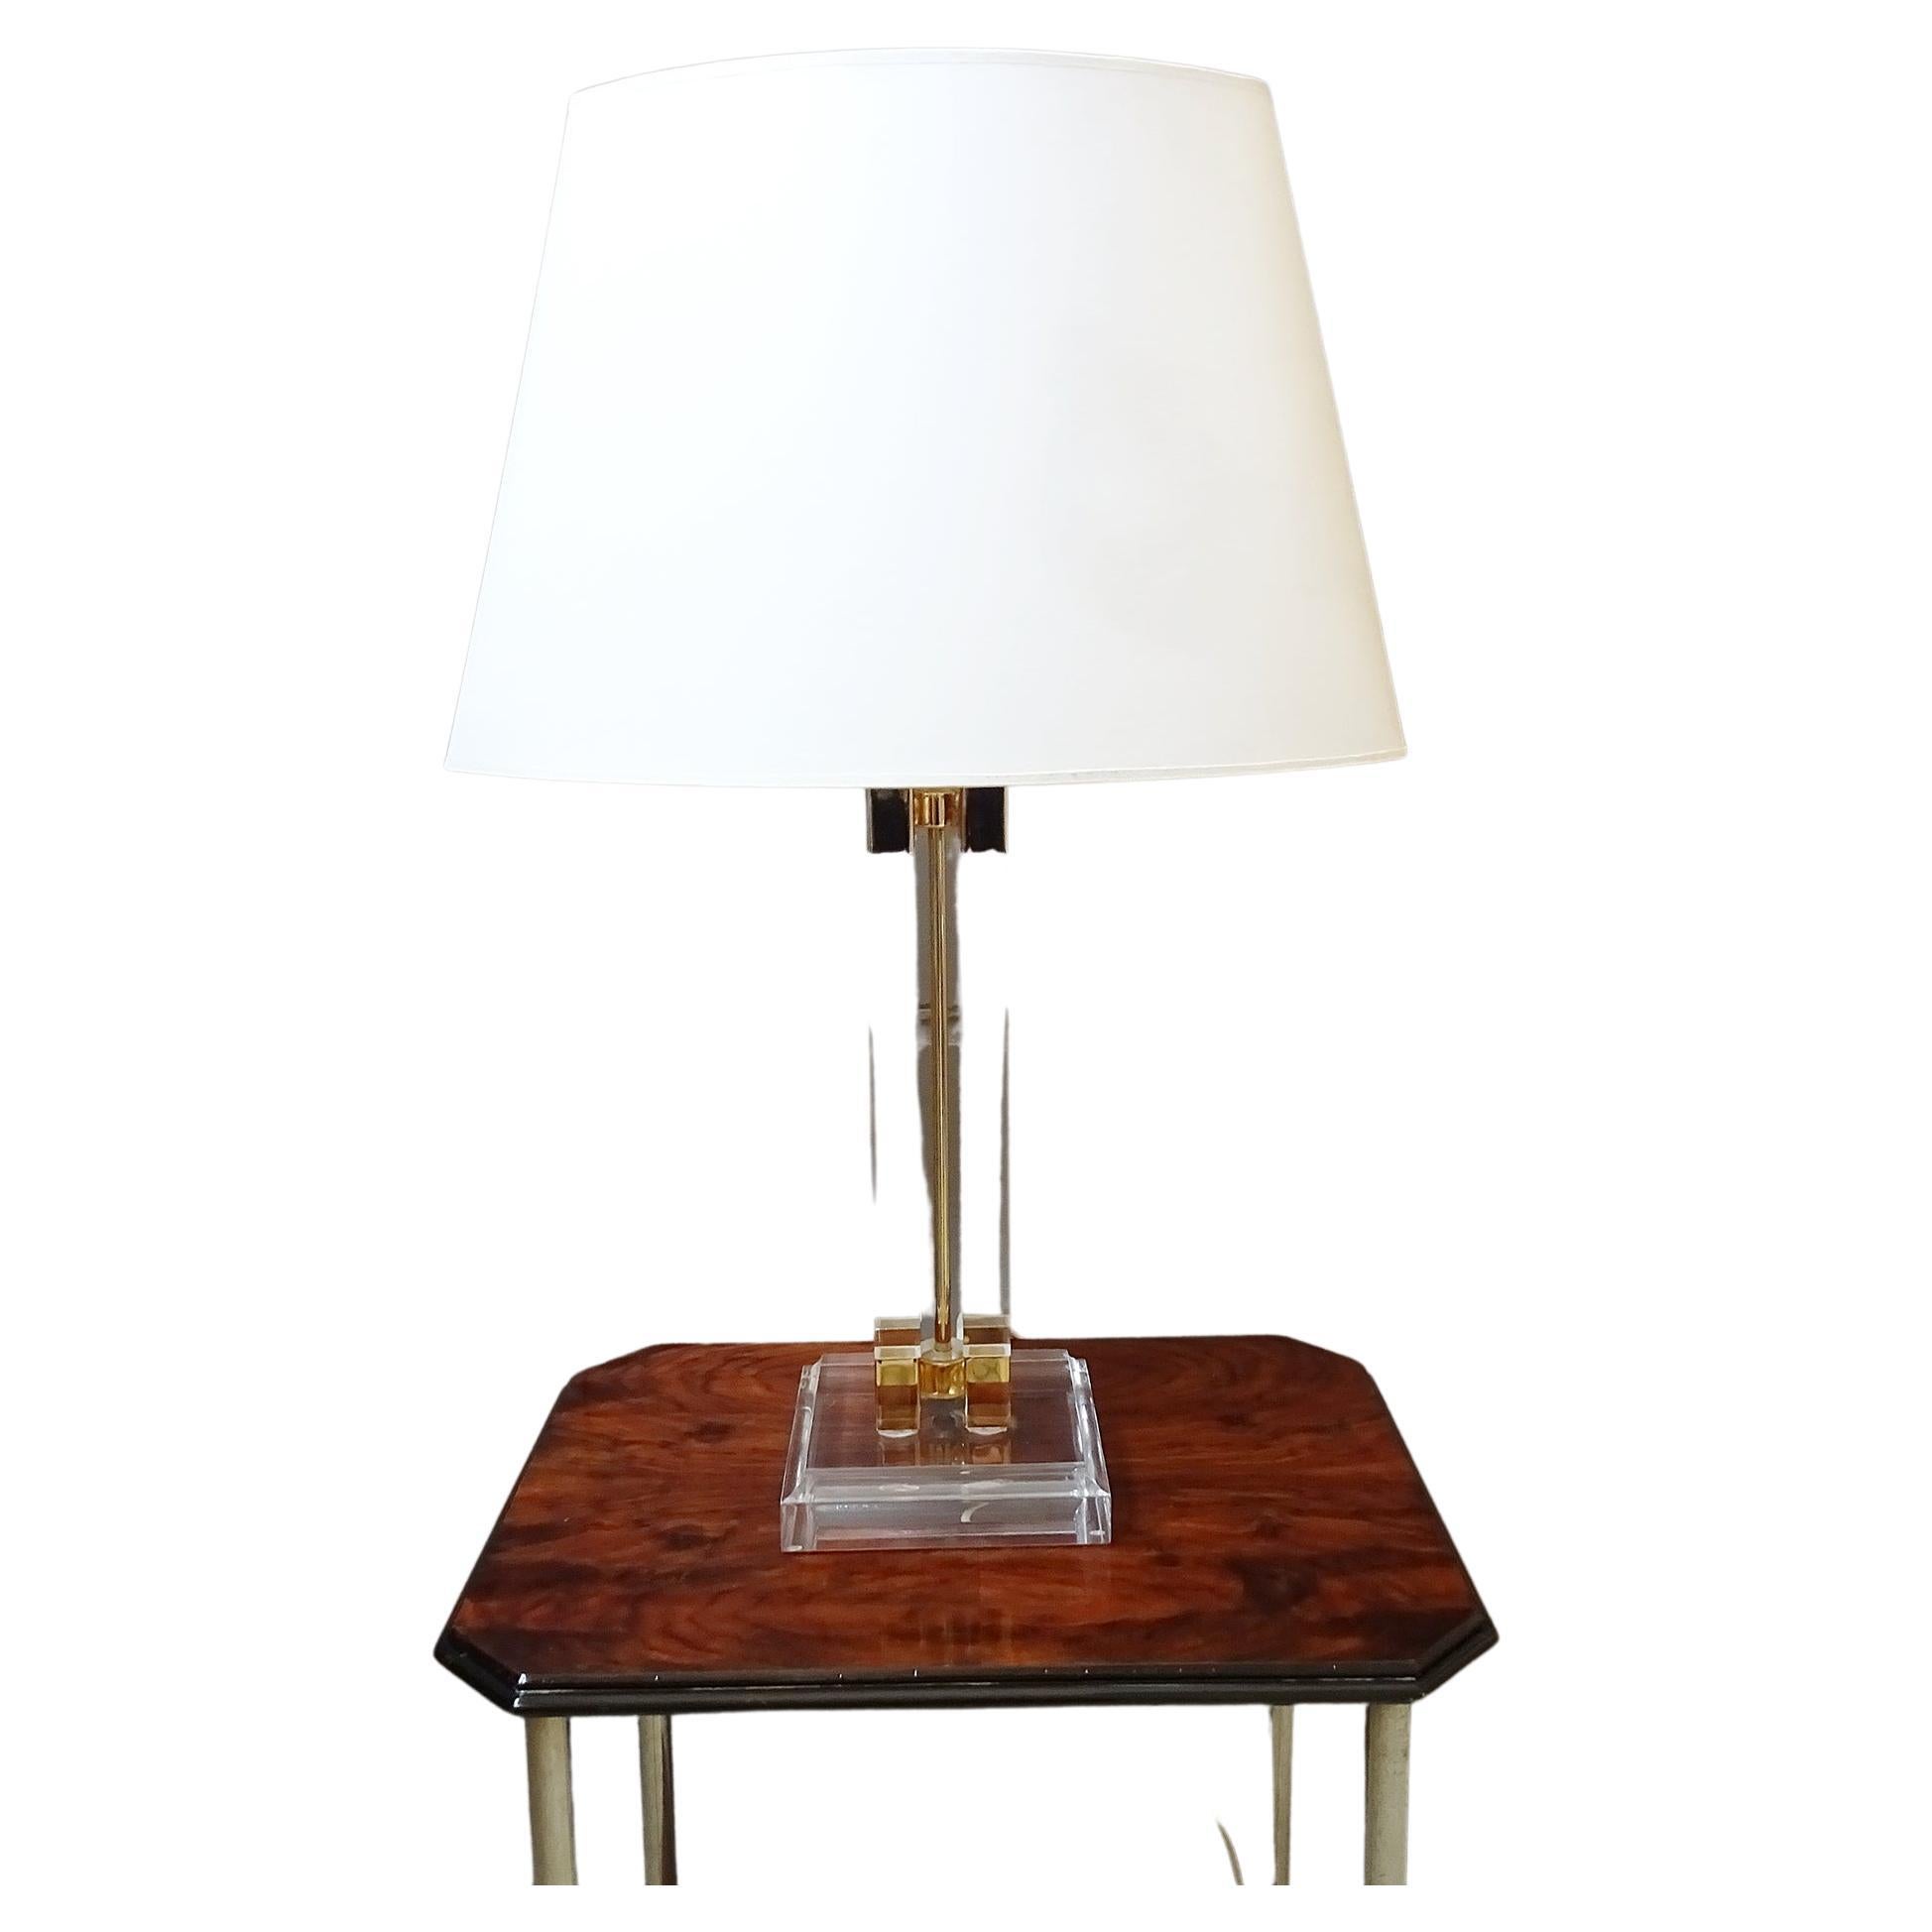 Lucite table lamp from the 1970s. Shapely large body made of acrylic glass with details made of golden metal with a large lampshade in cream color. Noble and timeless design, perfect for the Hollywood Regency style.

The original shade has